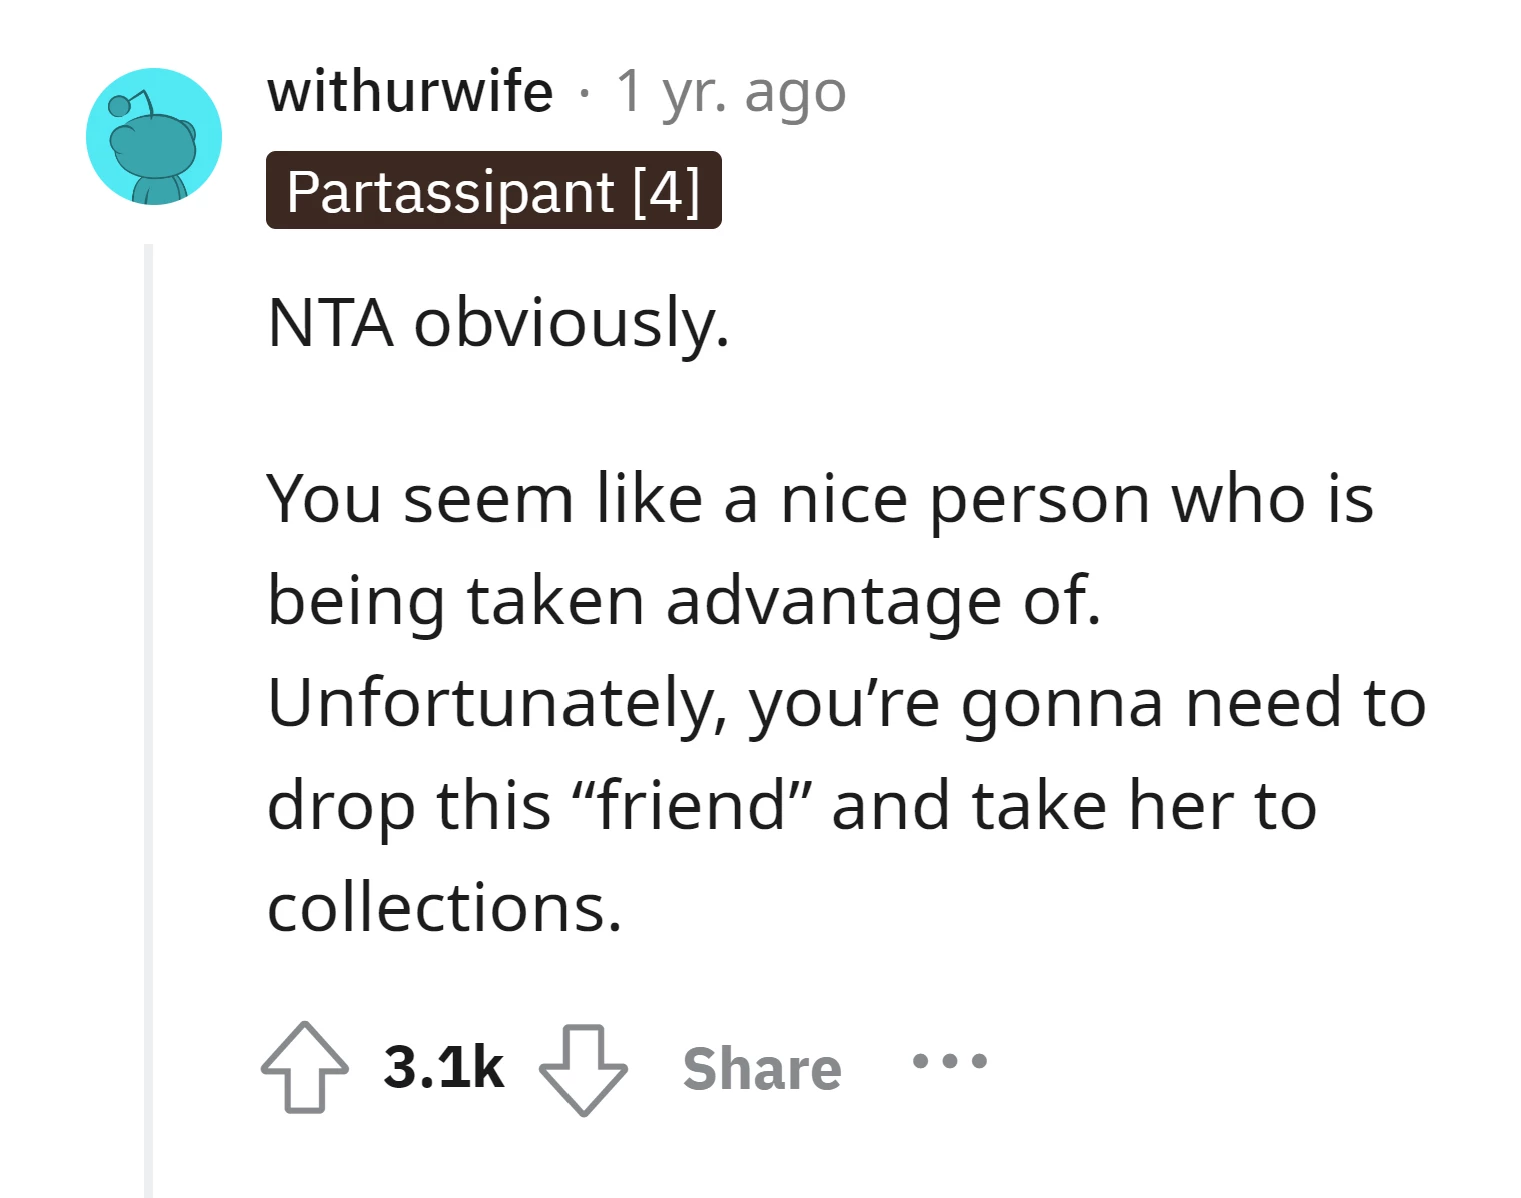 Yeah you should drop that friend, otherwise you will pay a bigger price